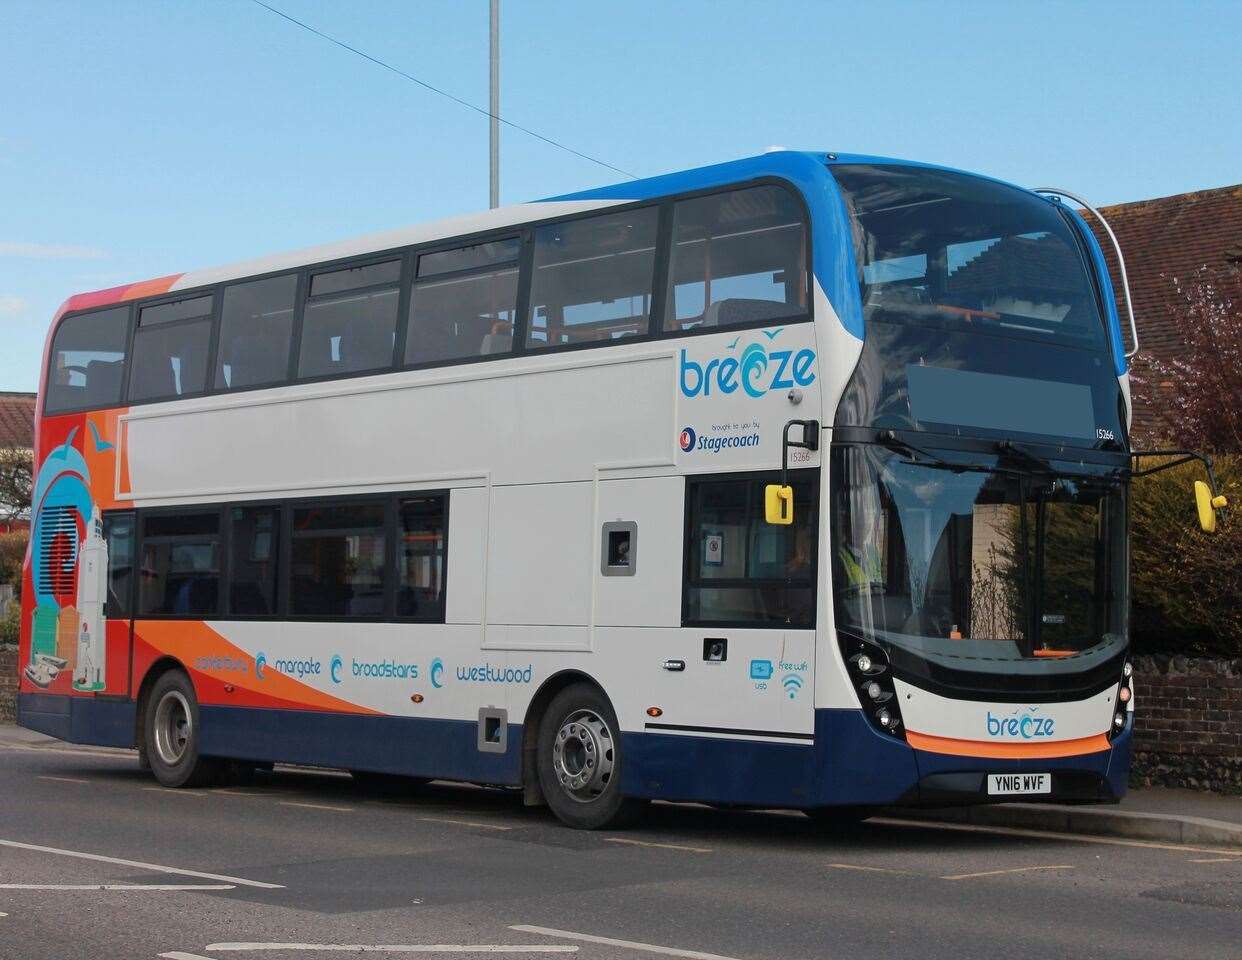 Two stagecoach buses were attacked last night. Stock image